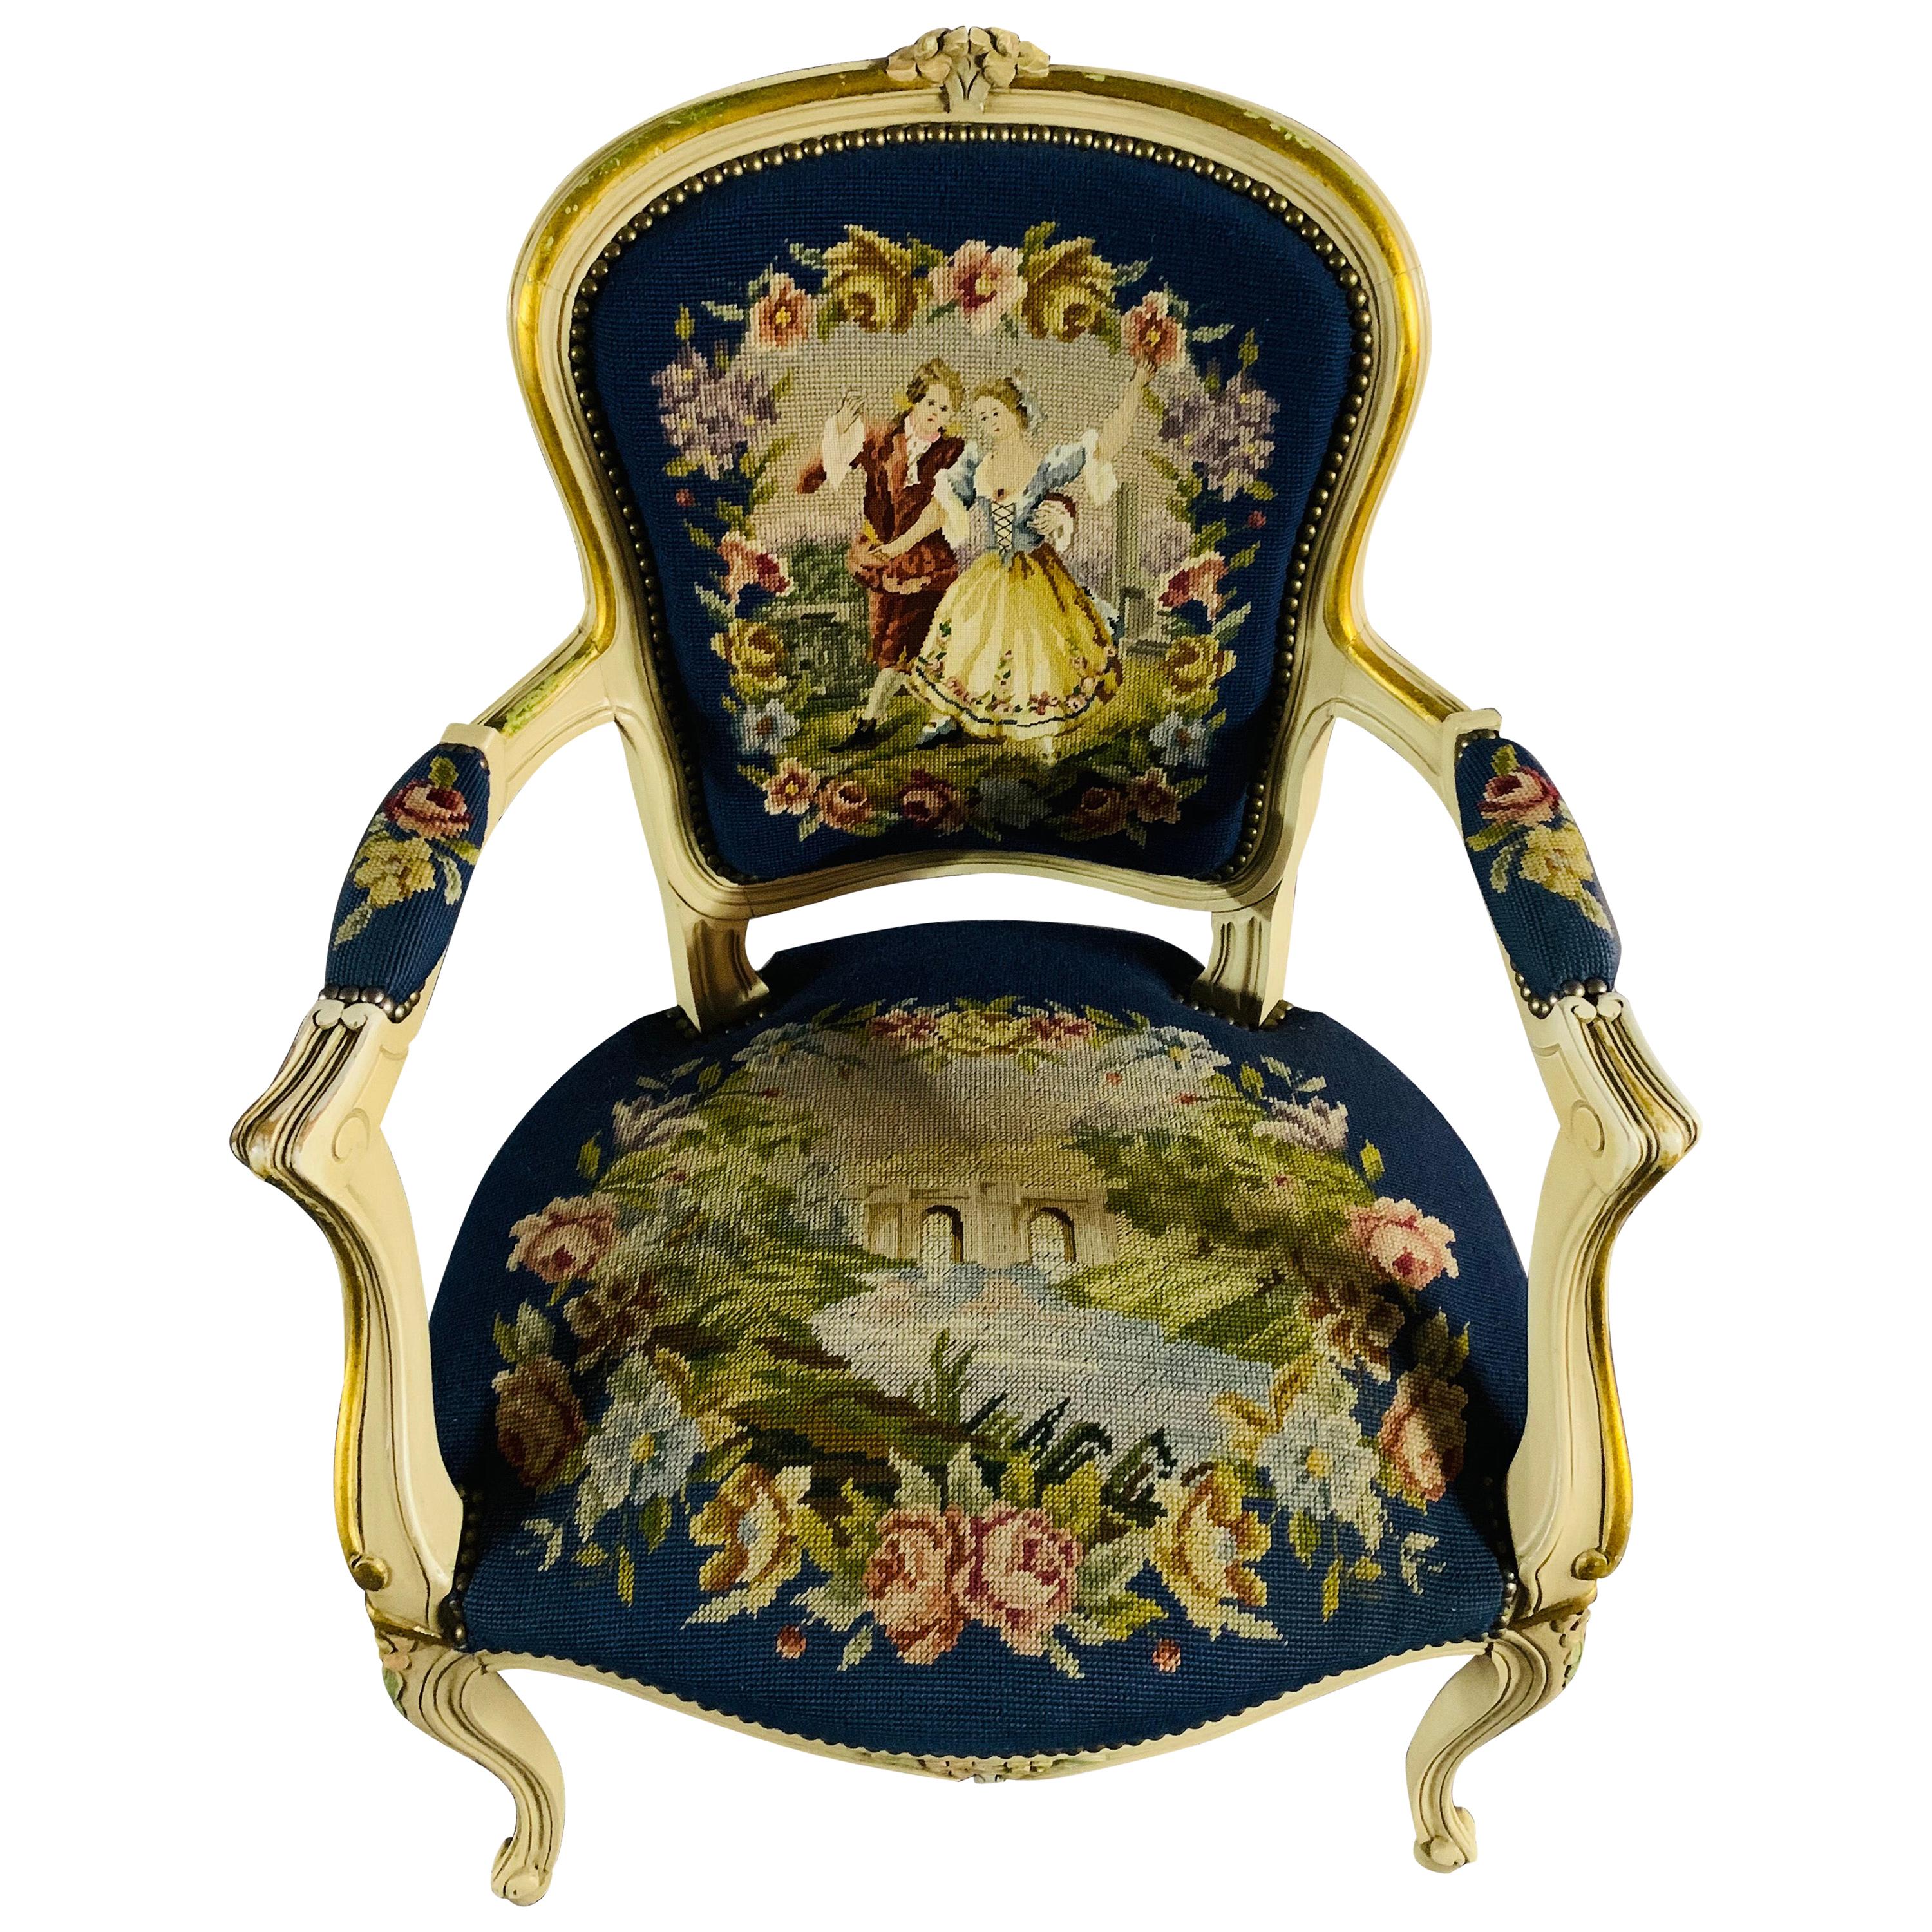 20th Century Beautiful Armchair in Louis Quinze Style with Tapestry Embroidery